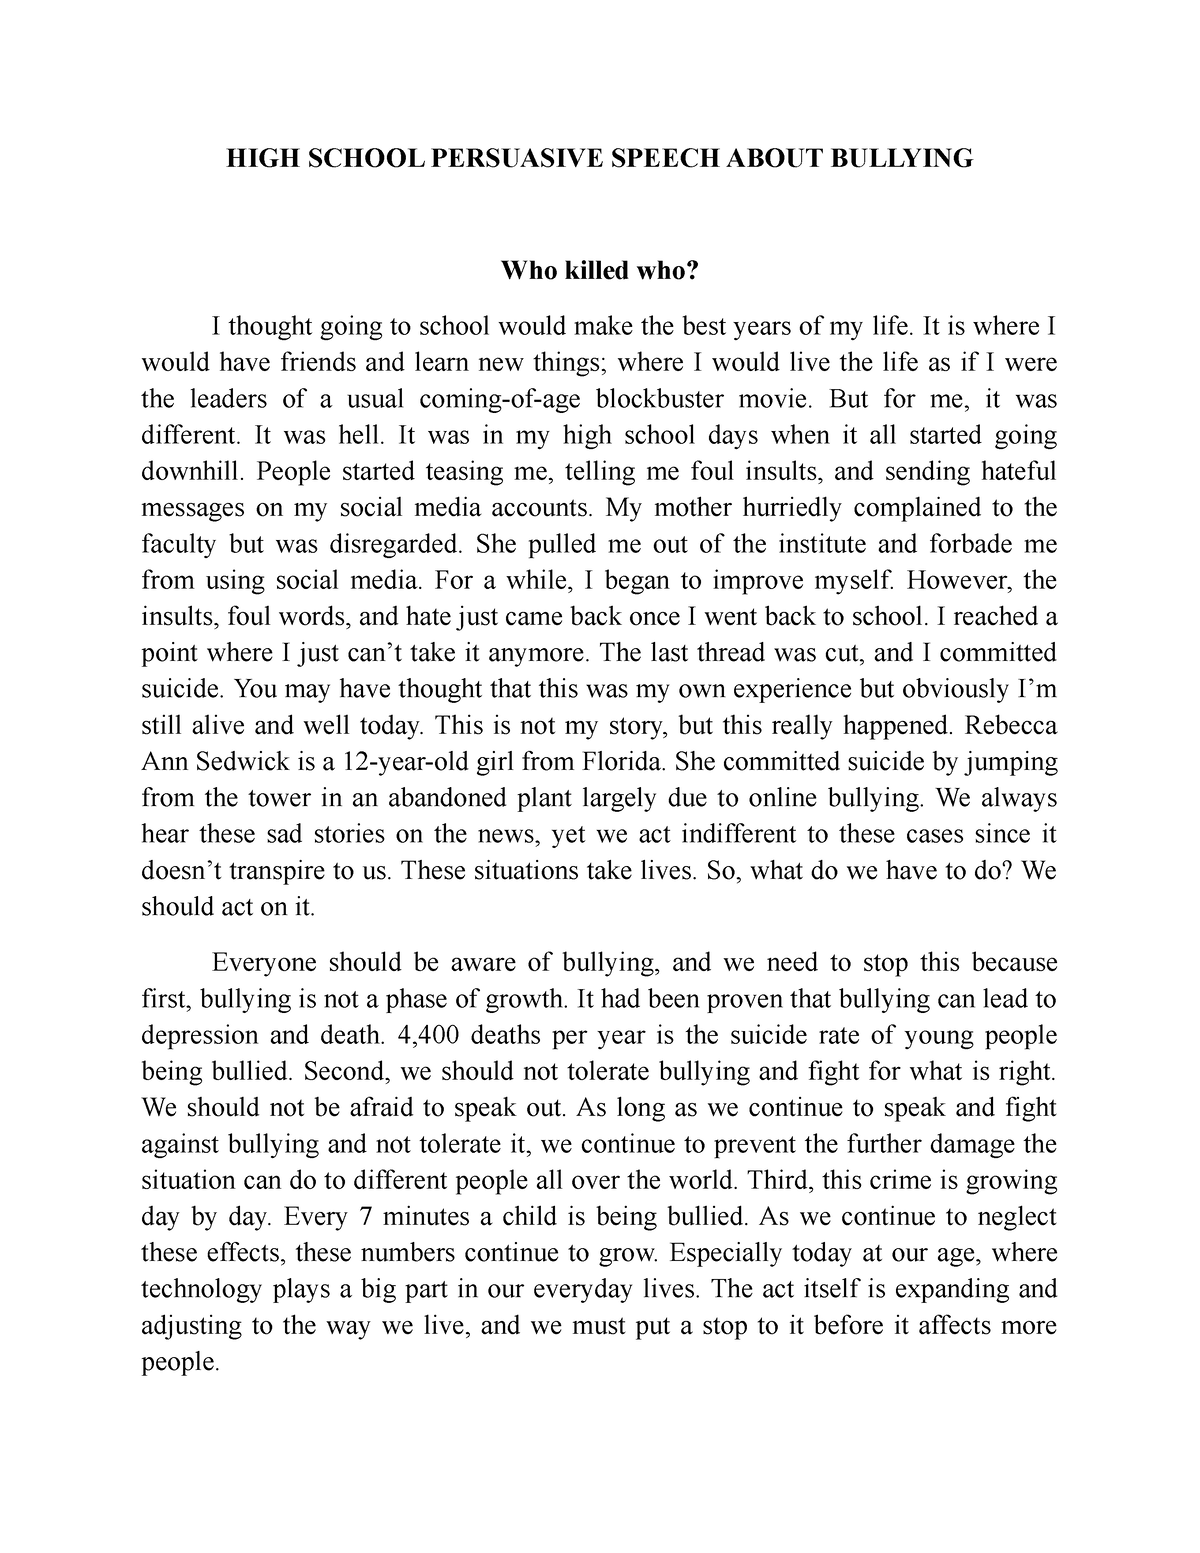 persuasive essay about bullying tagalog